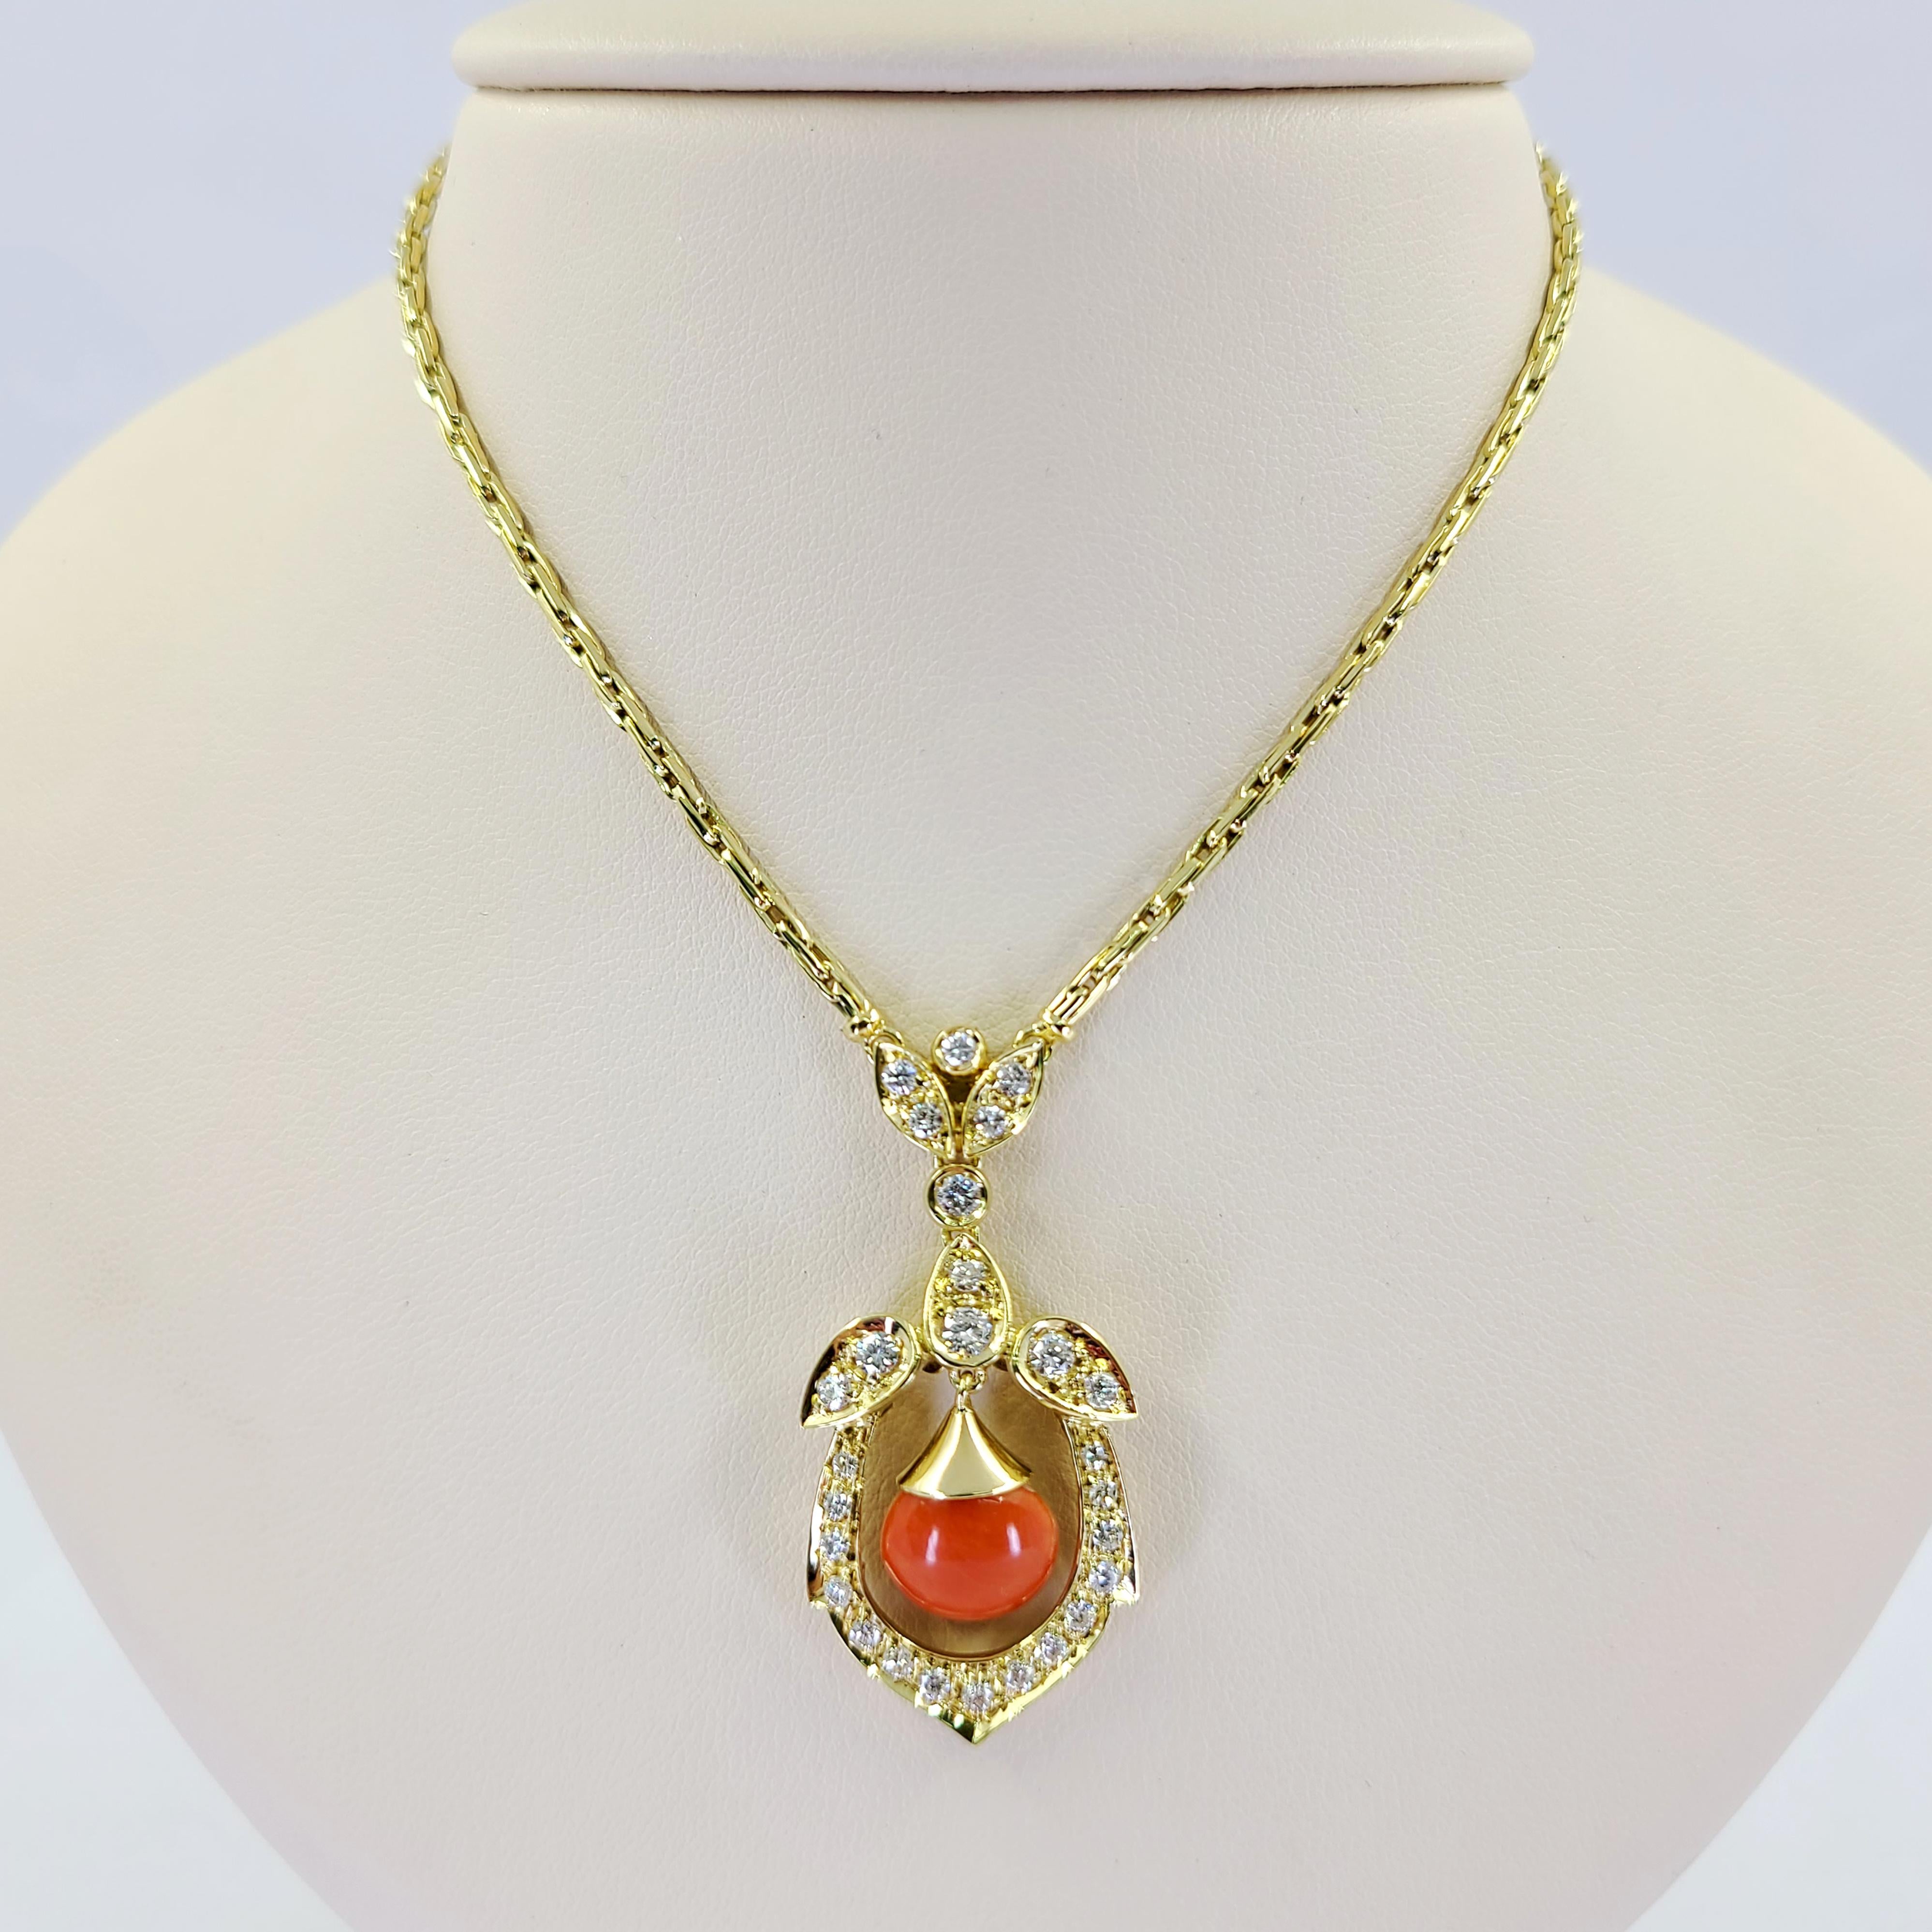 18 Karat Yellow Gold Necklace Featuring A Cabochon Coral Pendant Accented By 27 Round Brilliant Cut Diamonds of VS Clarity and G/H Color Totaling Approximately 0.75 Carats. 18 Inch Length with 1.75 Inch Drop. Finished Weight Is 21.4 Grams.